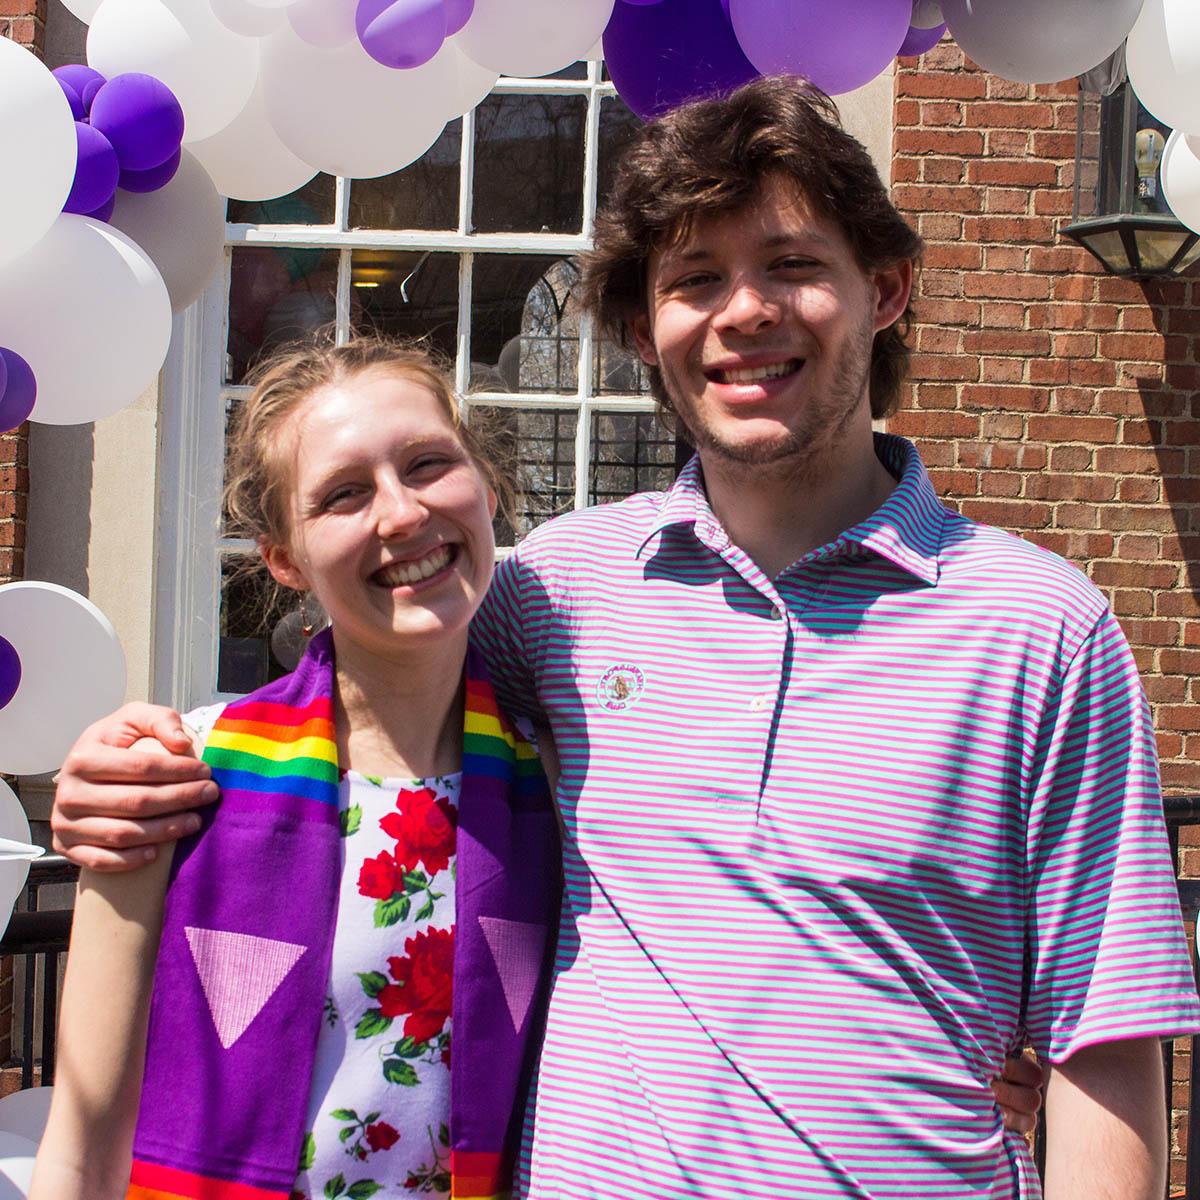 Photo of a young woman wearing a rainbow graduation stole, posing with a young man and smiling with purple and white balloons in the background